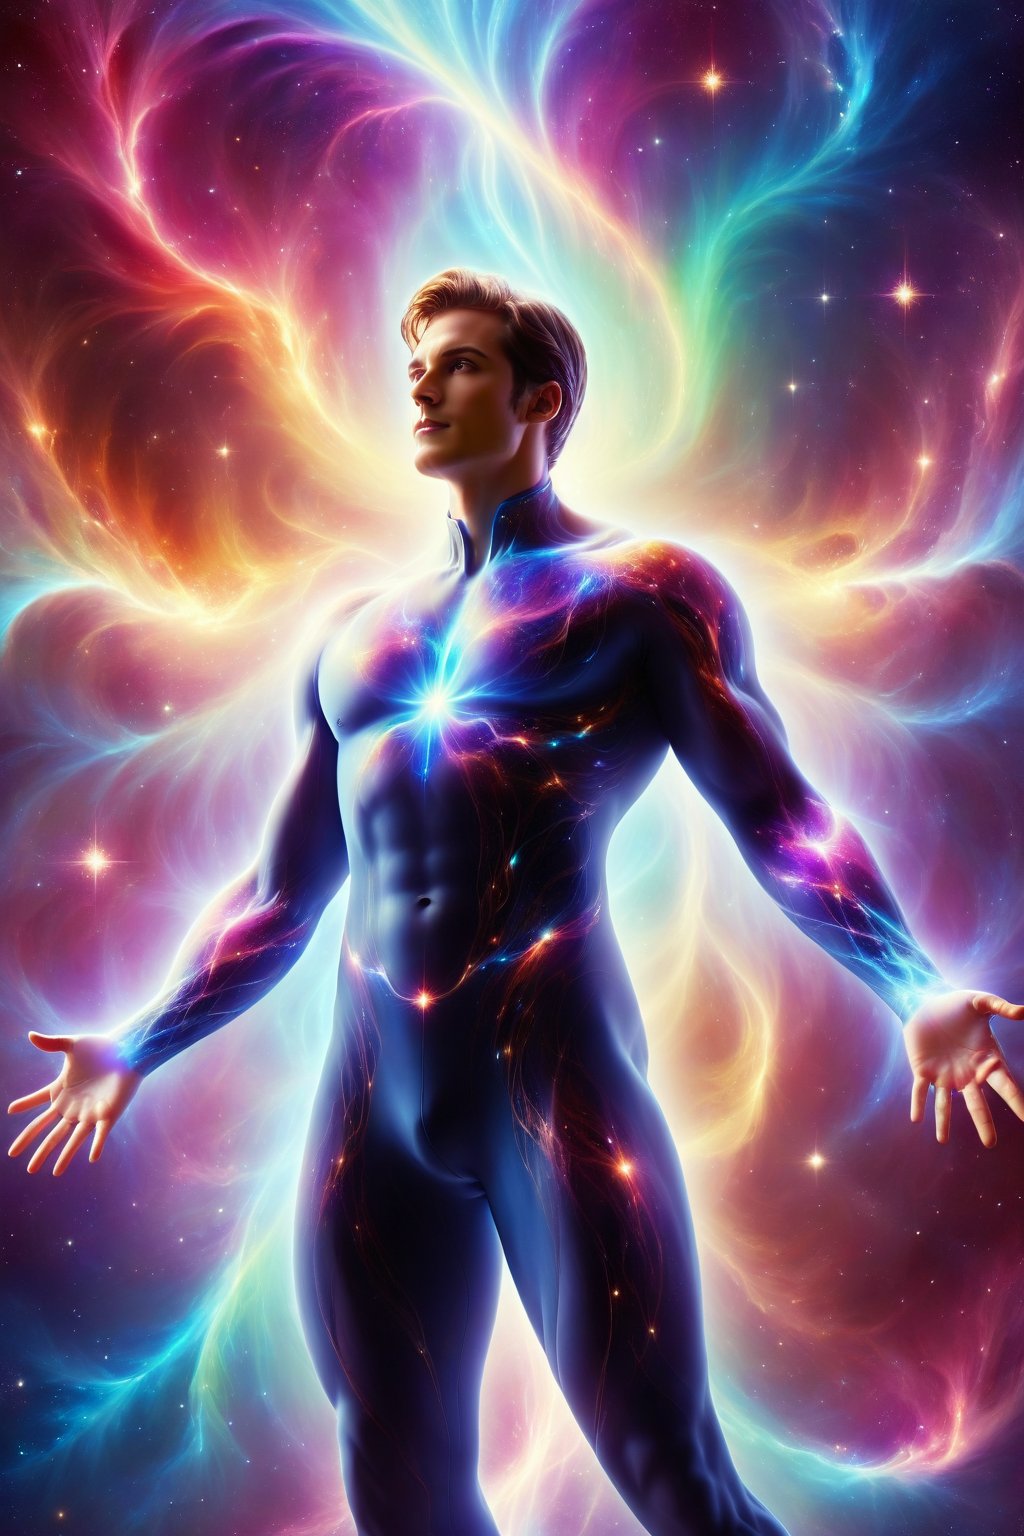 The man is floating in a nebula of vibrant colors. His translucent skin has fused with the nebula, creating a luminous aura effect. His muscles are now like streams of cosmic energy, with lights intertwining with each other. His eyes shine with a light that reflects the nebula, creating an almost hypnotic effect. The man is in a protective pose, with his arm extended into space as if he were guarding something very valuable.